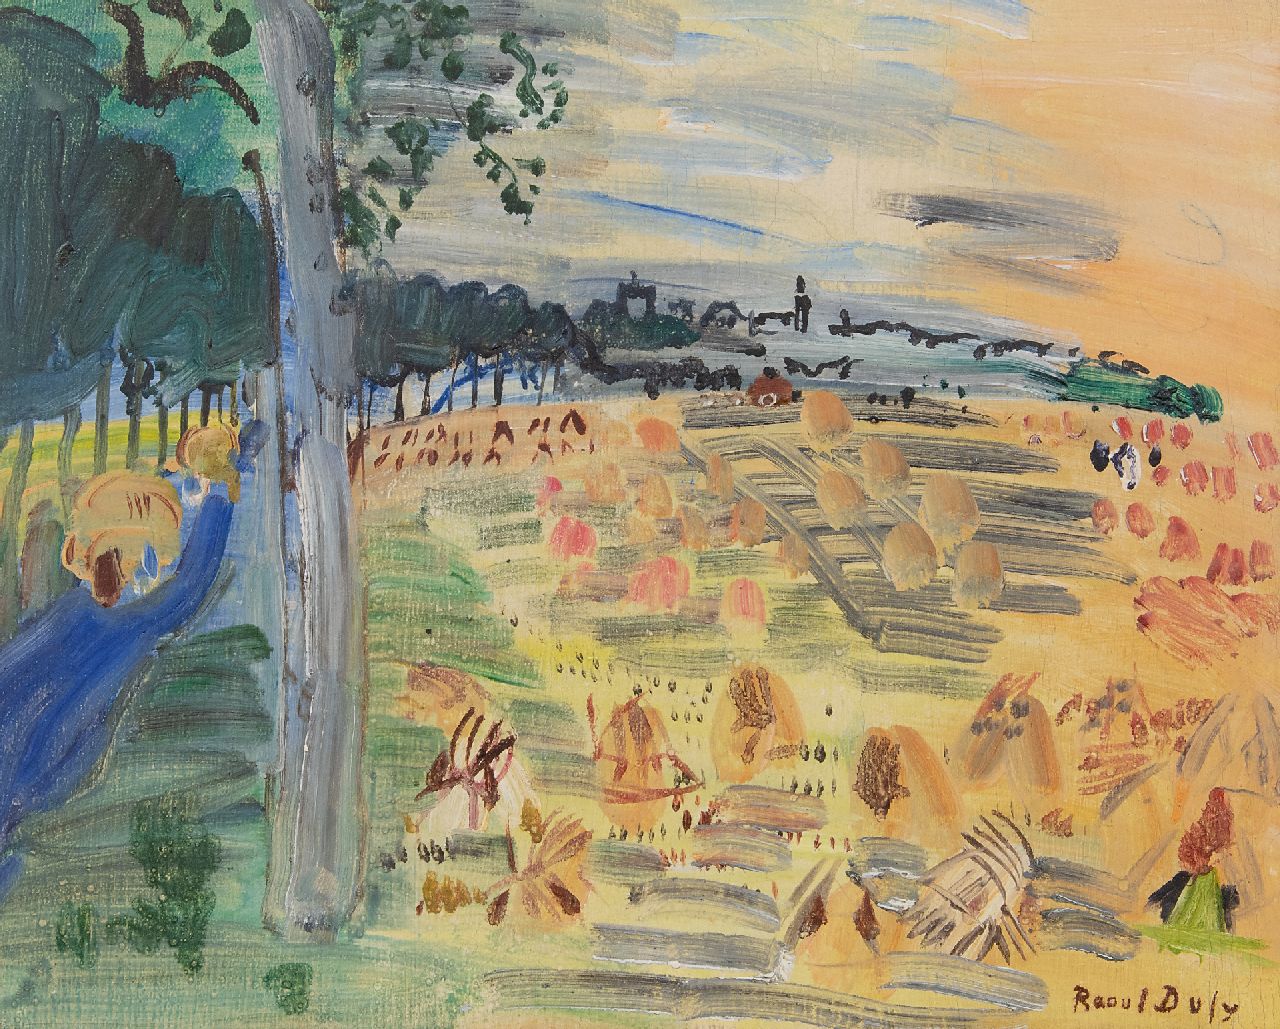 Dufy R.  | Raoul Dufy, Moisson de Langres (Harvest in Langres), oil on canvas 33.0 x 41.0 cm, signed l.r. and dated  'Langres' 1935